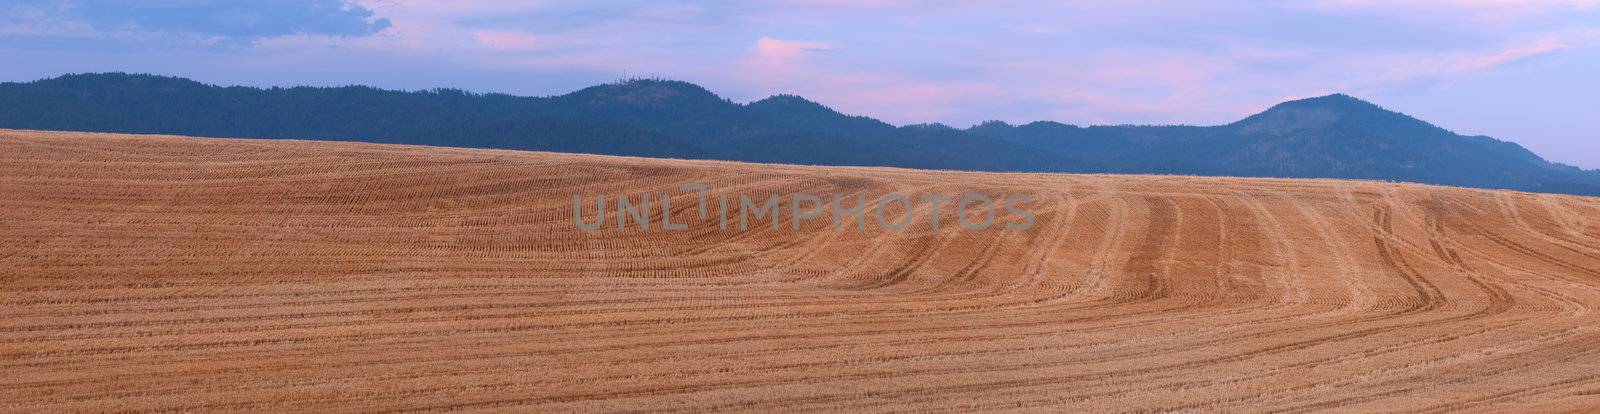 Harvested wheat field patterns and The Palouse Range on a summer evening, Latah County, Idaho, USA